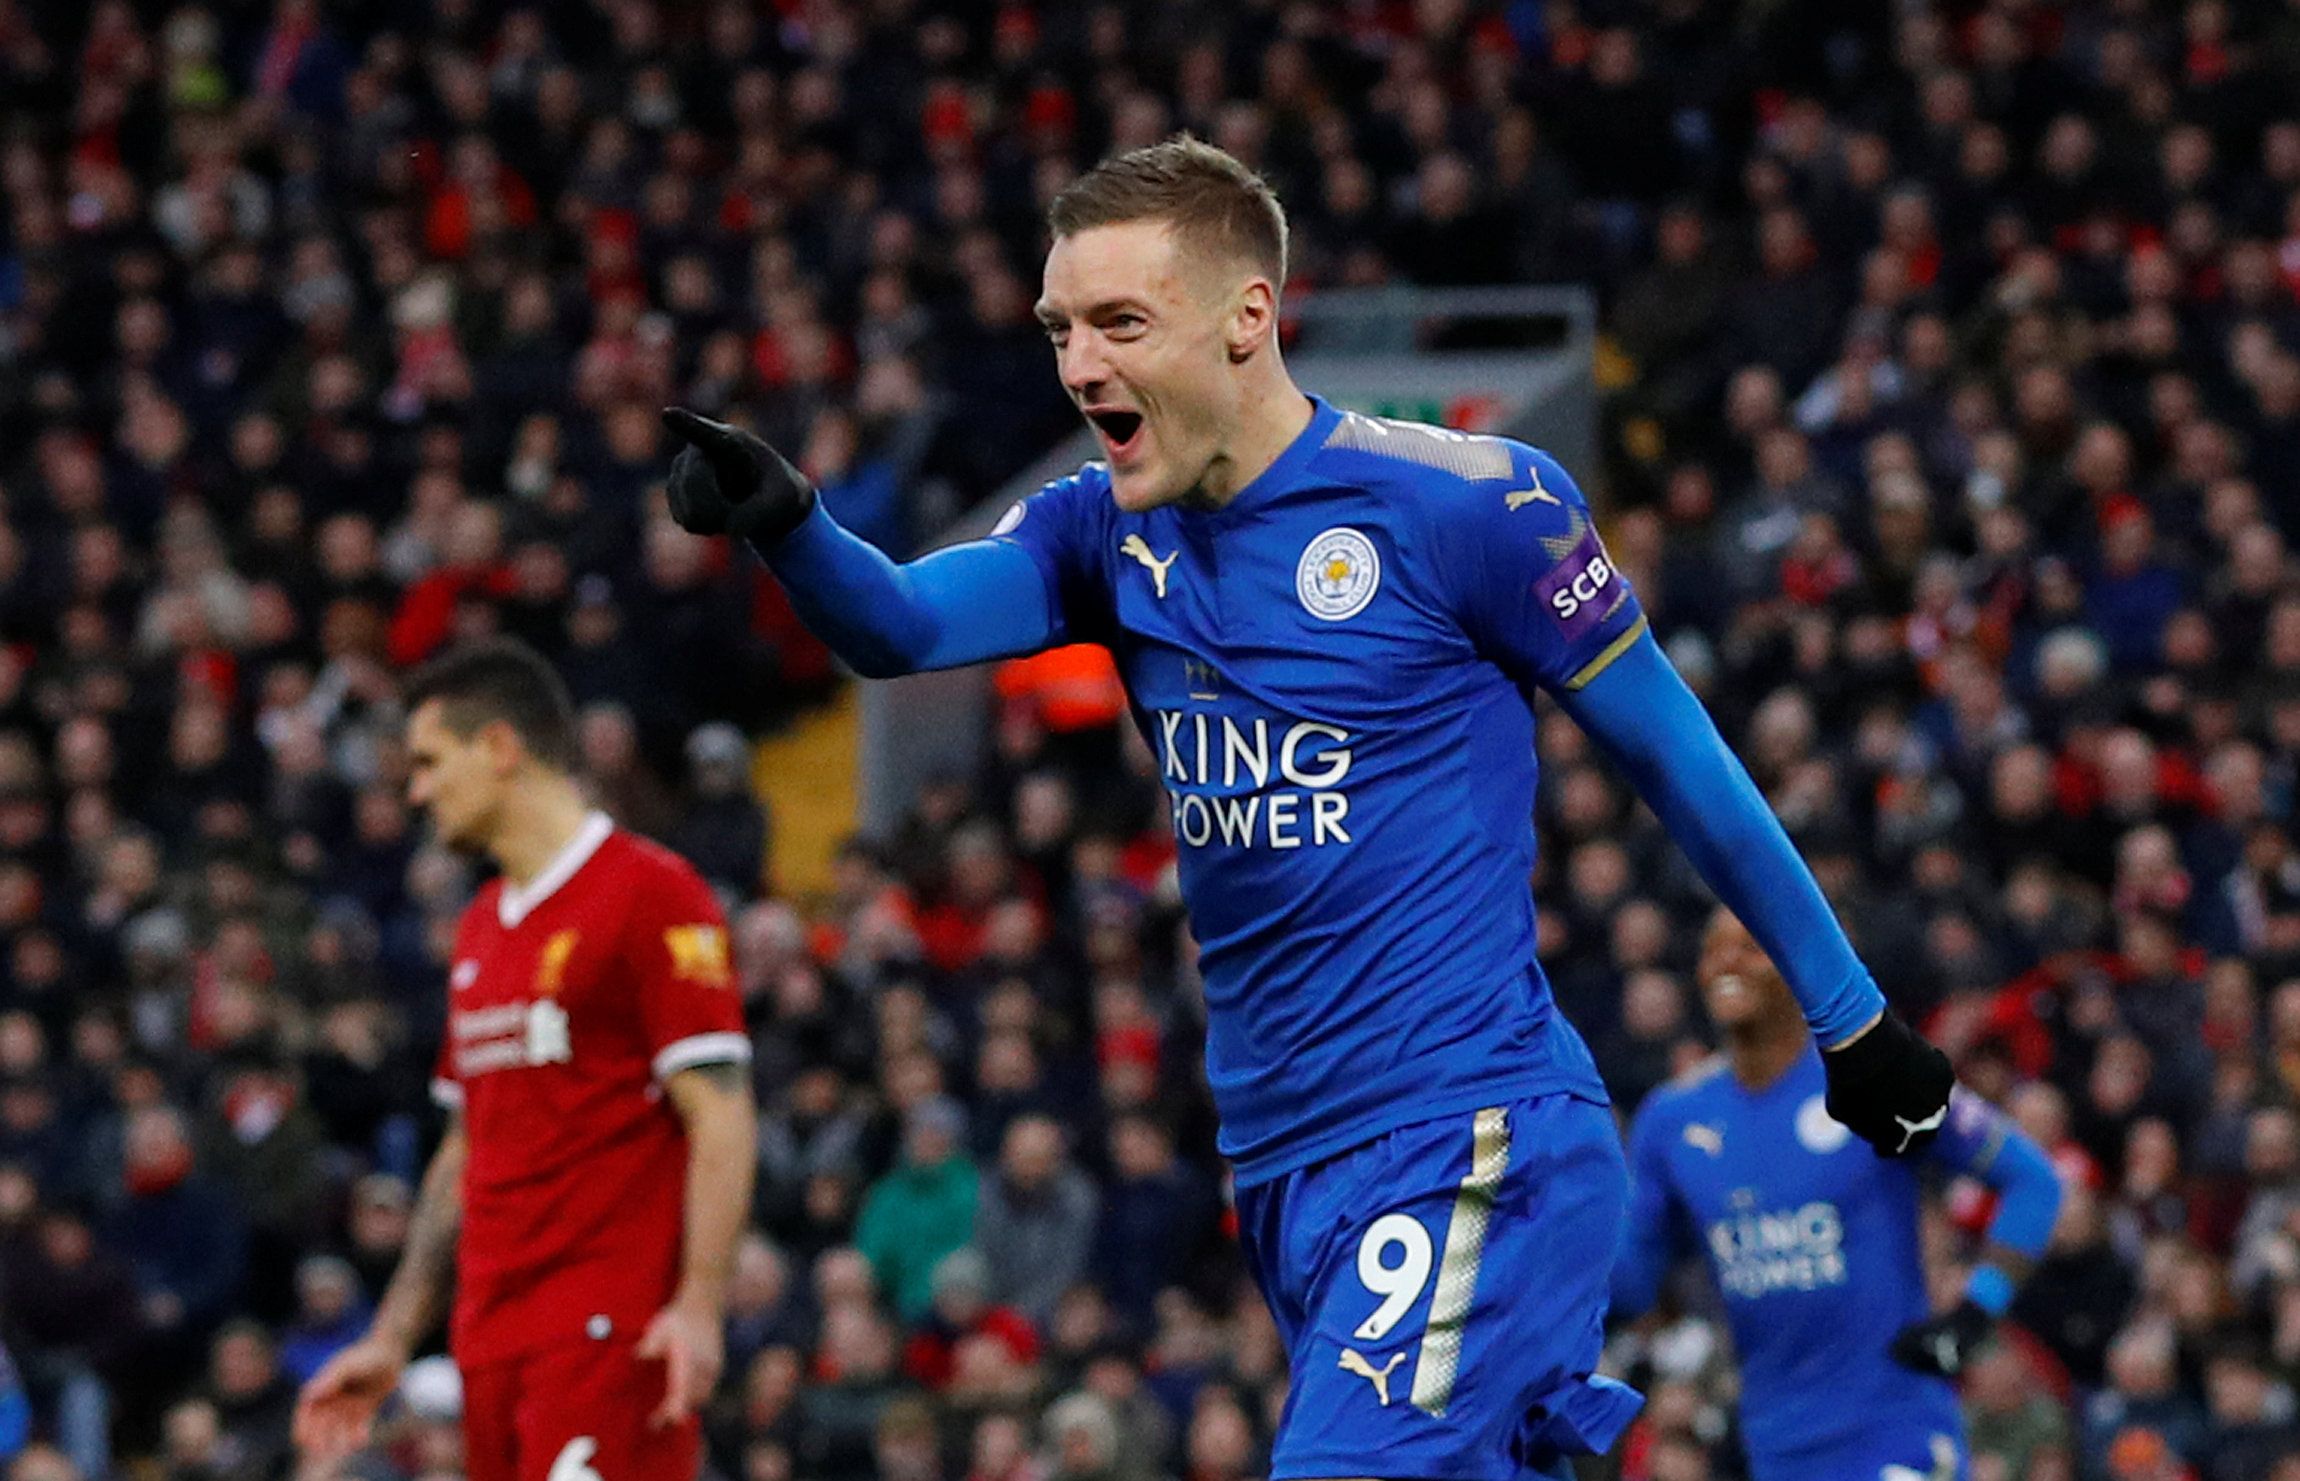 Soccer Football - Premier League - Liverpool vs Leicester City - Anfield, Liverpool, Britain - December 30, 2017   Leicester City's Jamie Vardy celebrates scoring their first goal     REUTERS/Phil Noble    EDITORIAL USE ONLY. No use with unauthorized audio, video, data, fixture lists, club/league logos or "live" services. Online in-match use limited to 75 images, no video emulation. No use in betting, games or single club/league/player publications.  Please contact your account representative fo